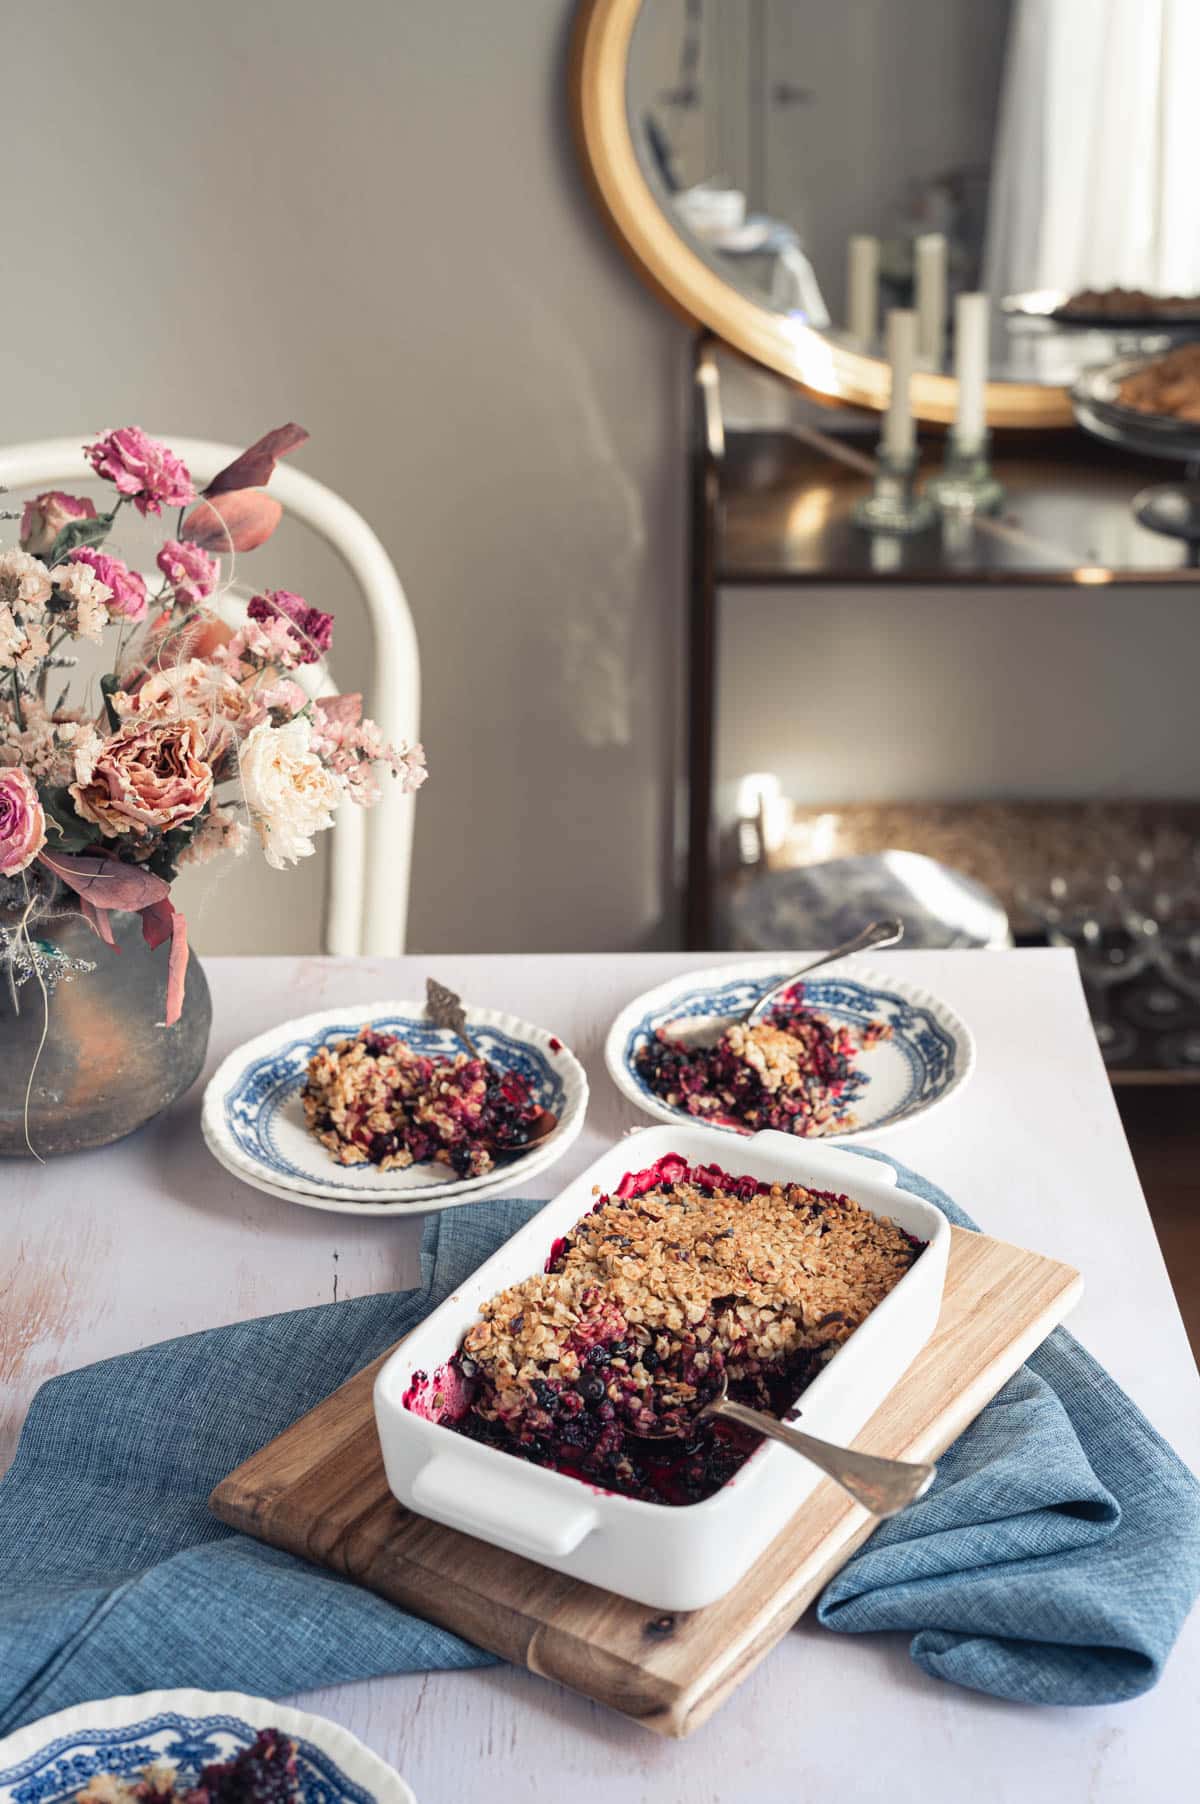 Berry crisp served on the table. The crisp is in a white baking dish. It has been portioned onto blue-patterned plates. There are dried flowers in a vase on the table, and in the background, you can see a serving trolley and a mirror.